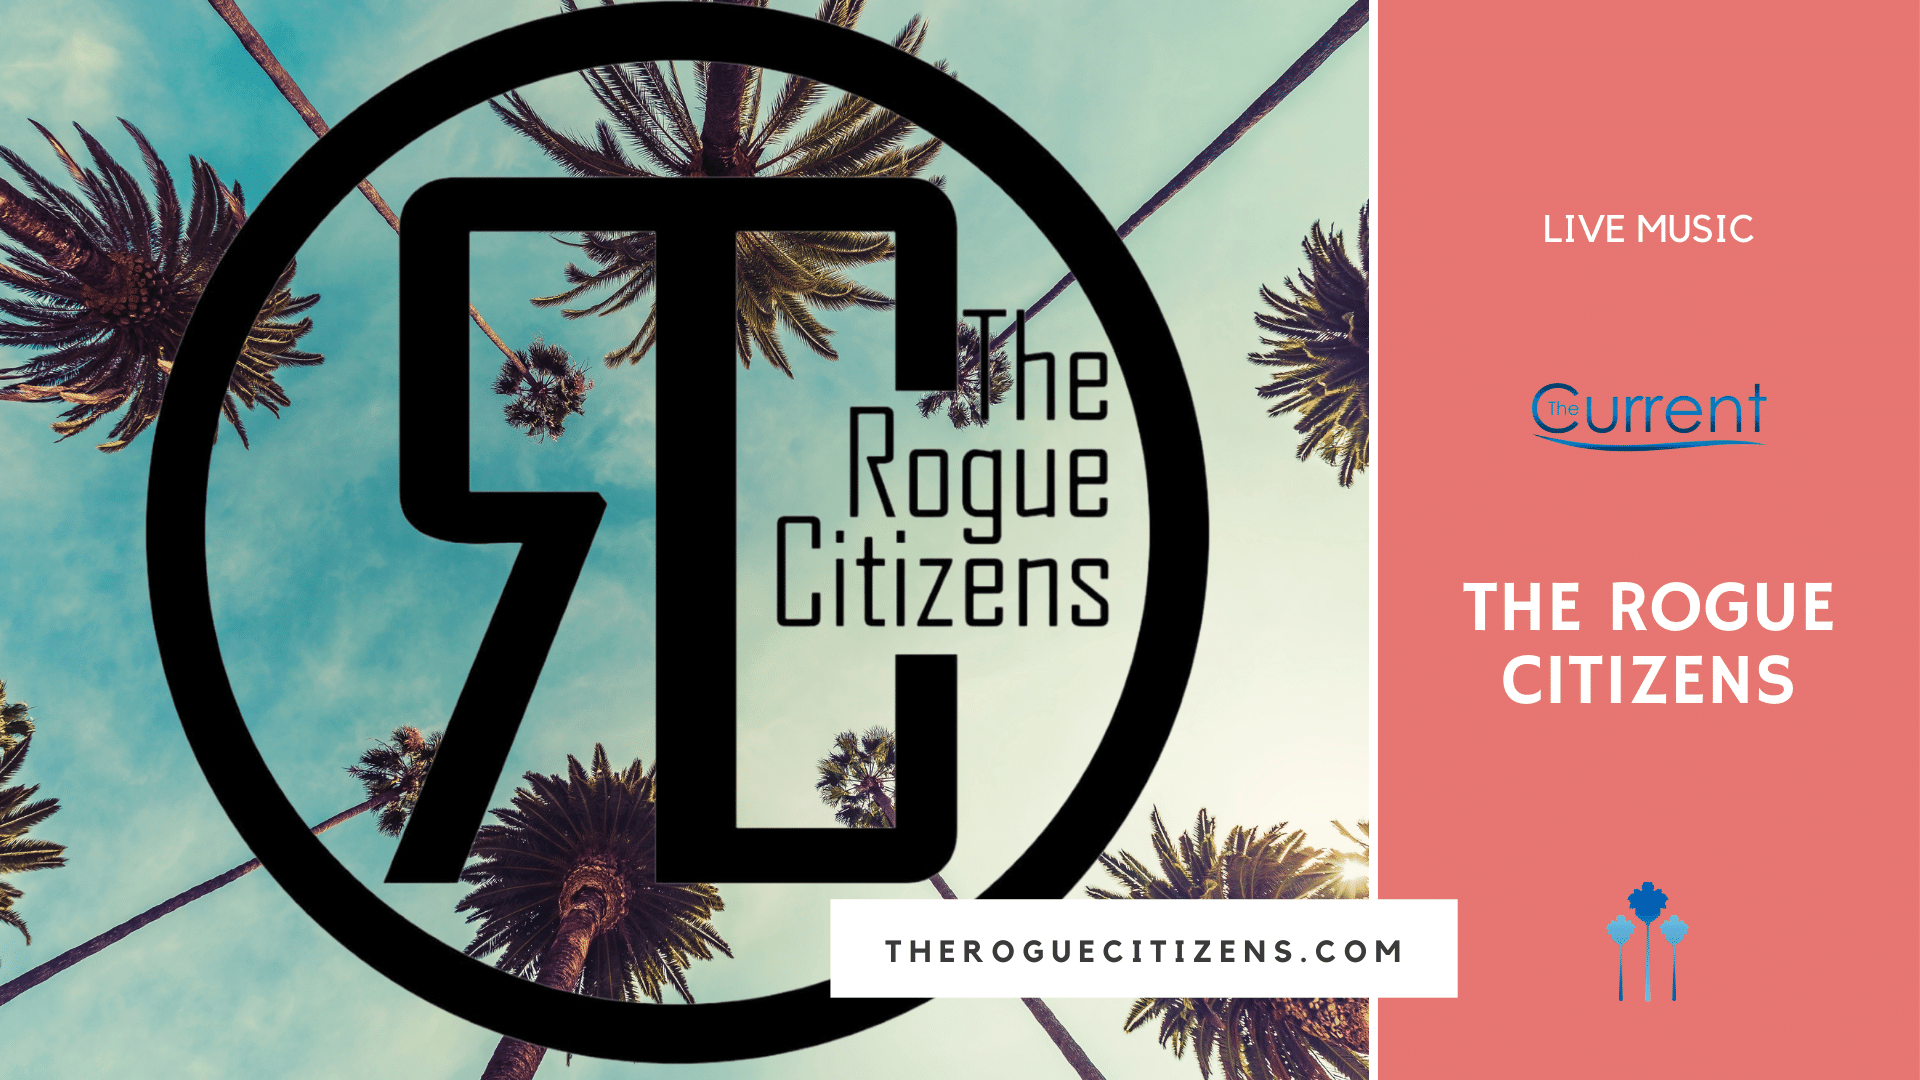 The Rogue Citizens